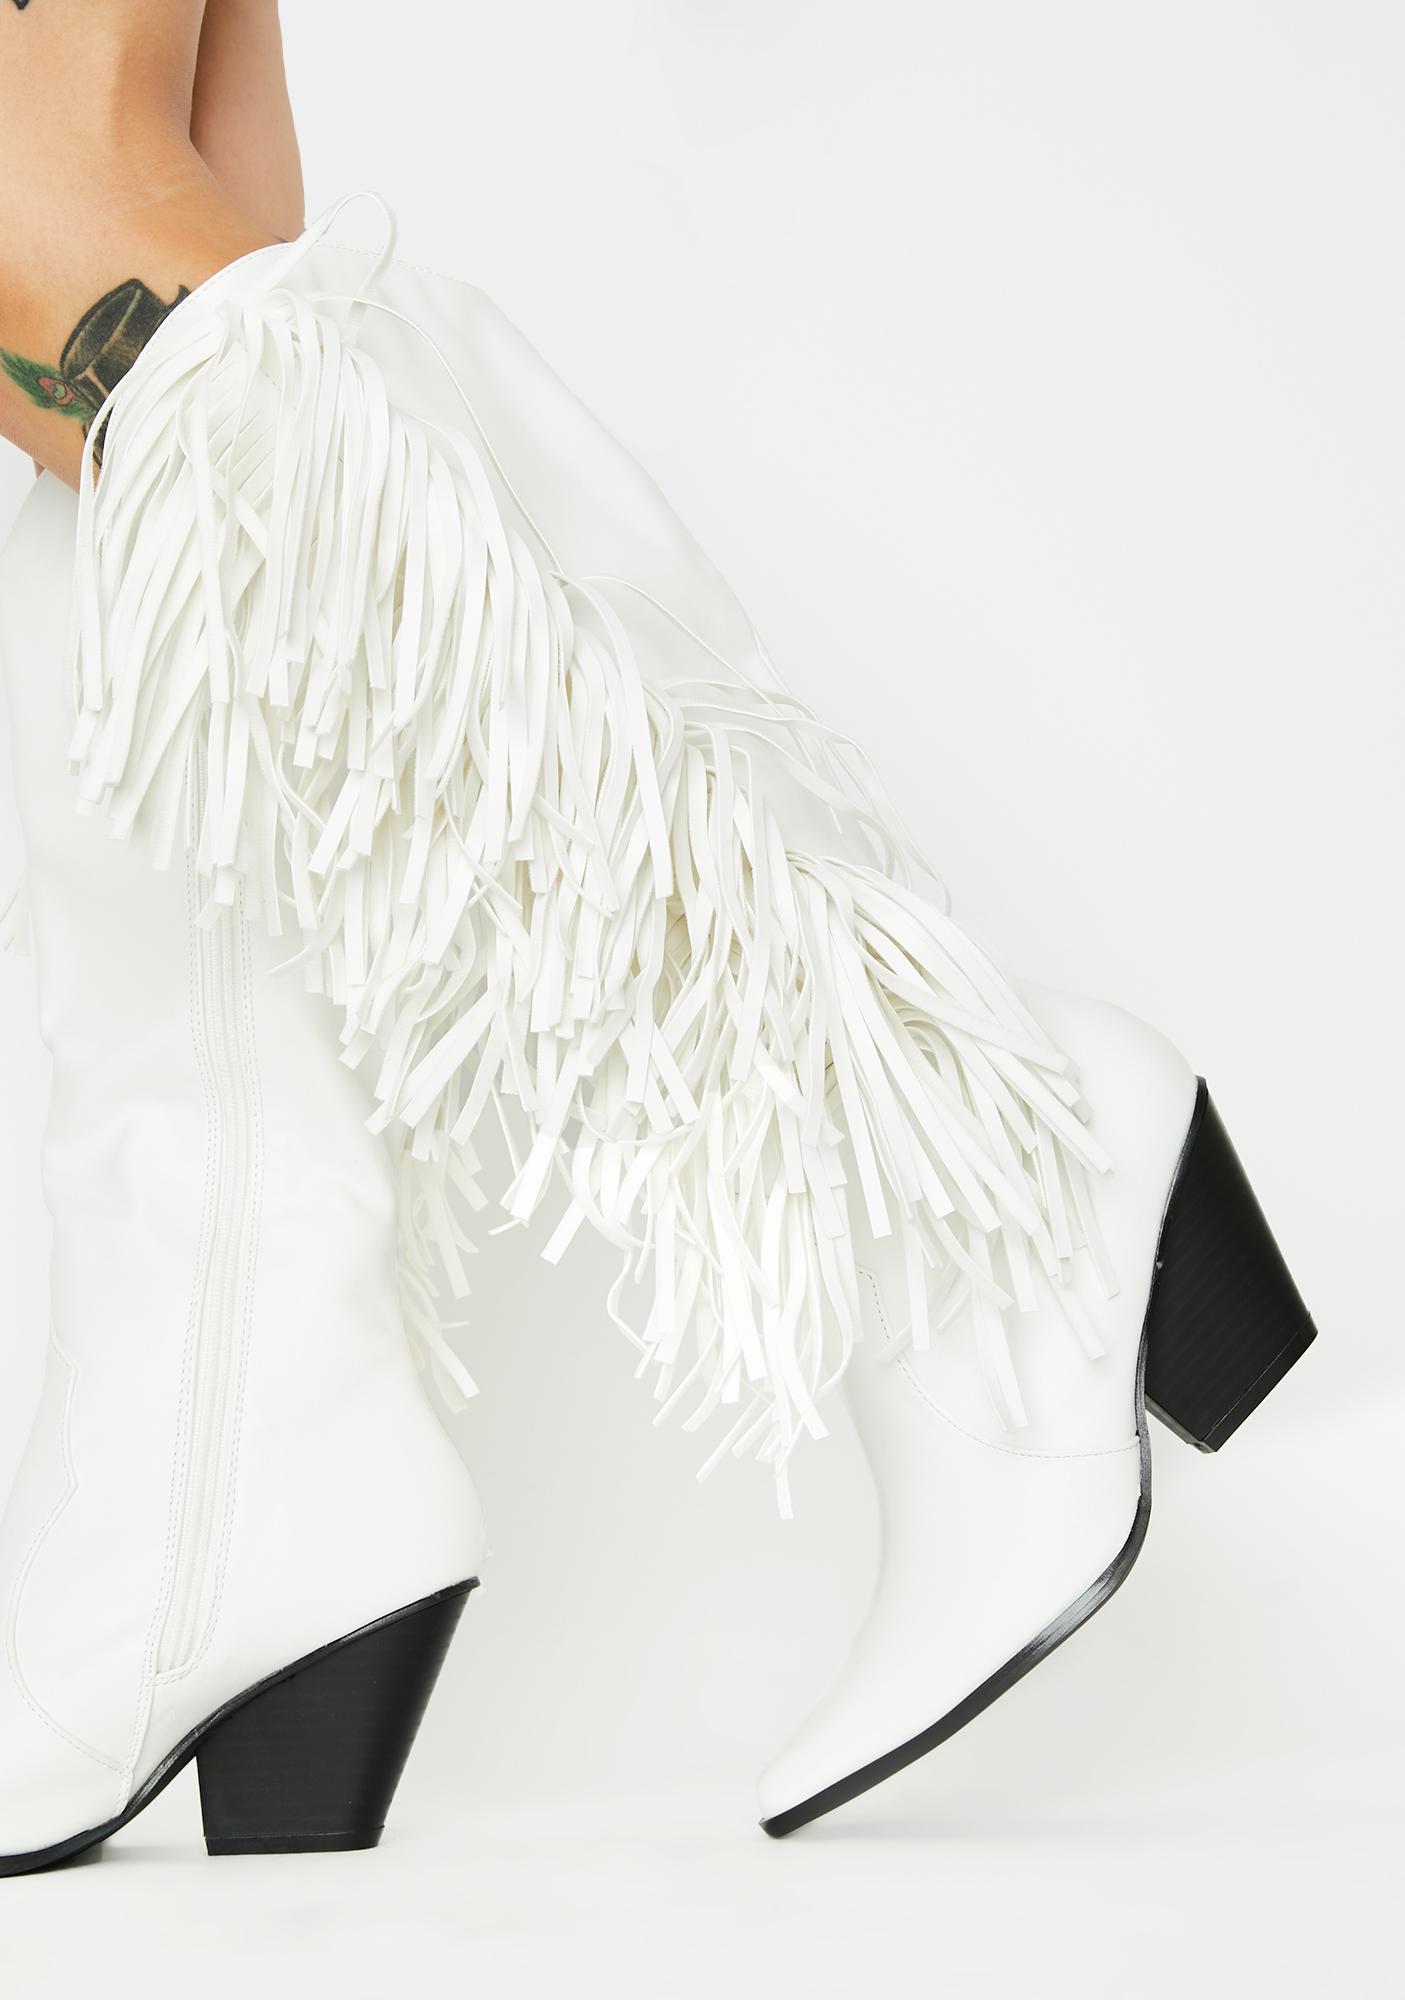 white cowgirl boots with fringe